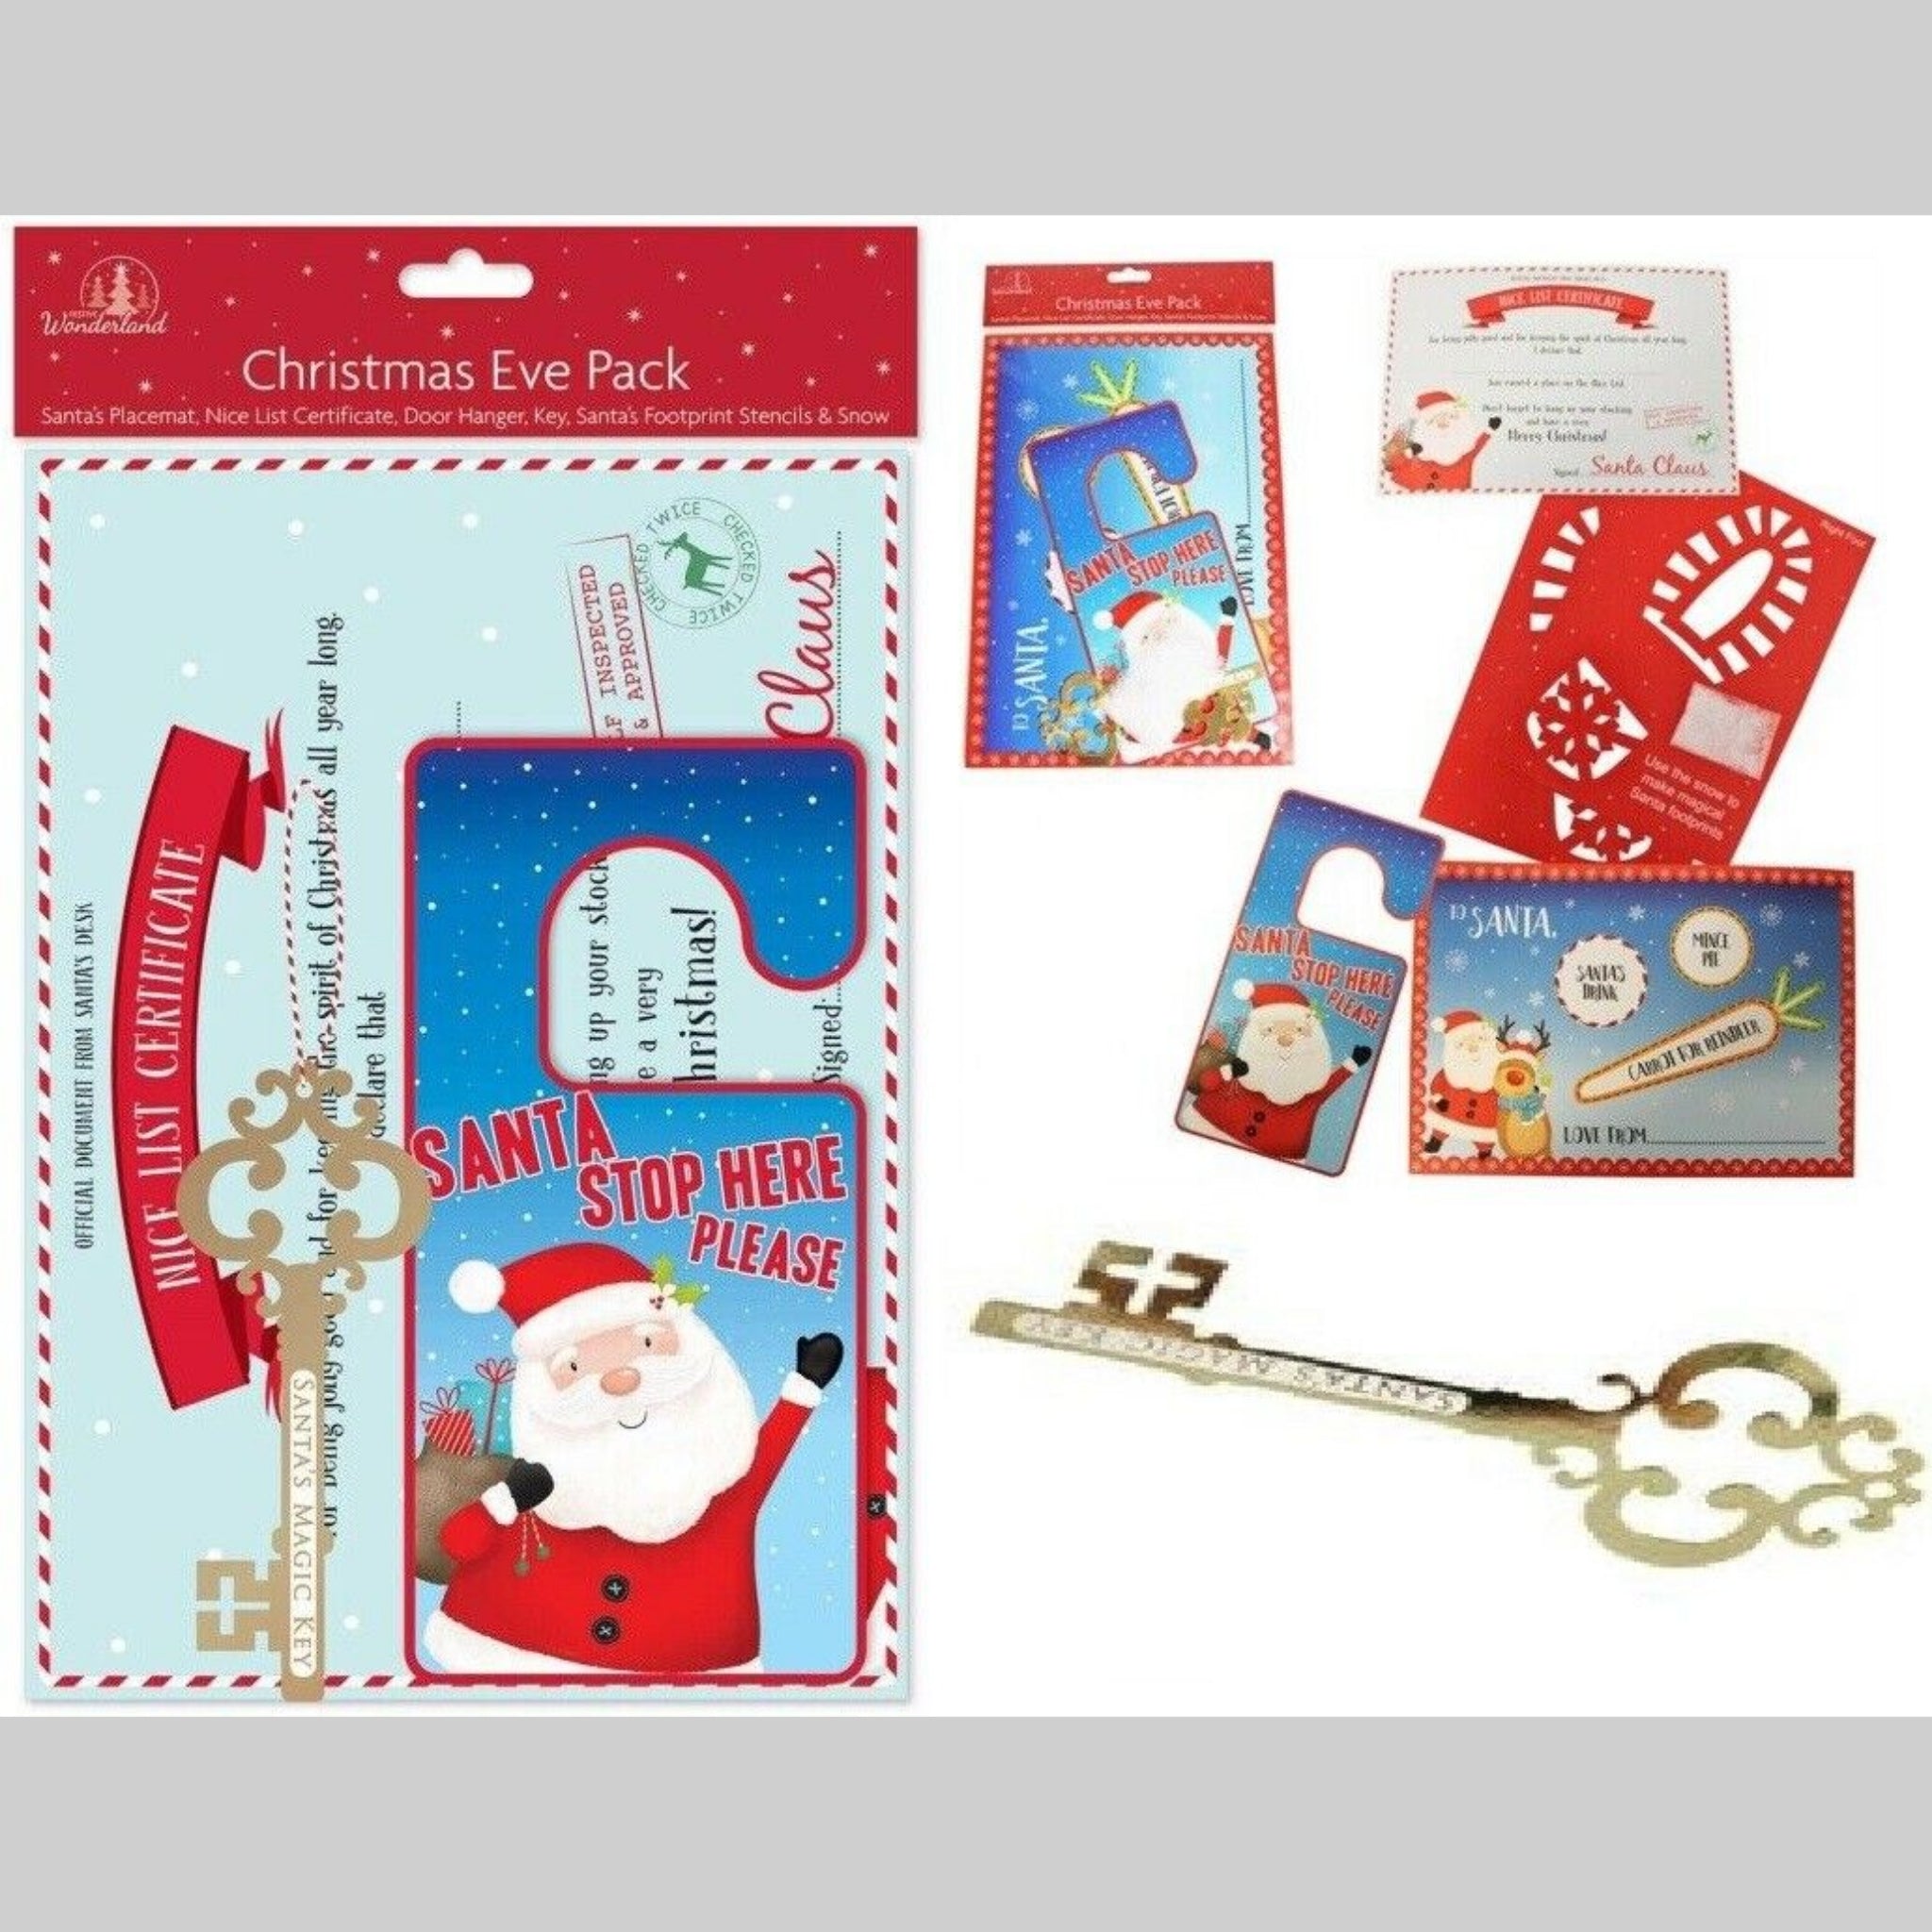 Beclen Harp Christmas/Xmas Eve Pack Get Ready For Santa's Arrival With Magic Key/Footprint Stencil And Door Hanger Set